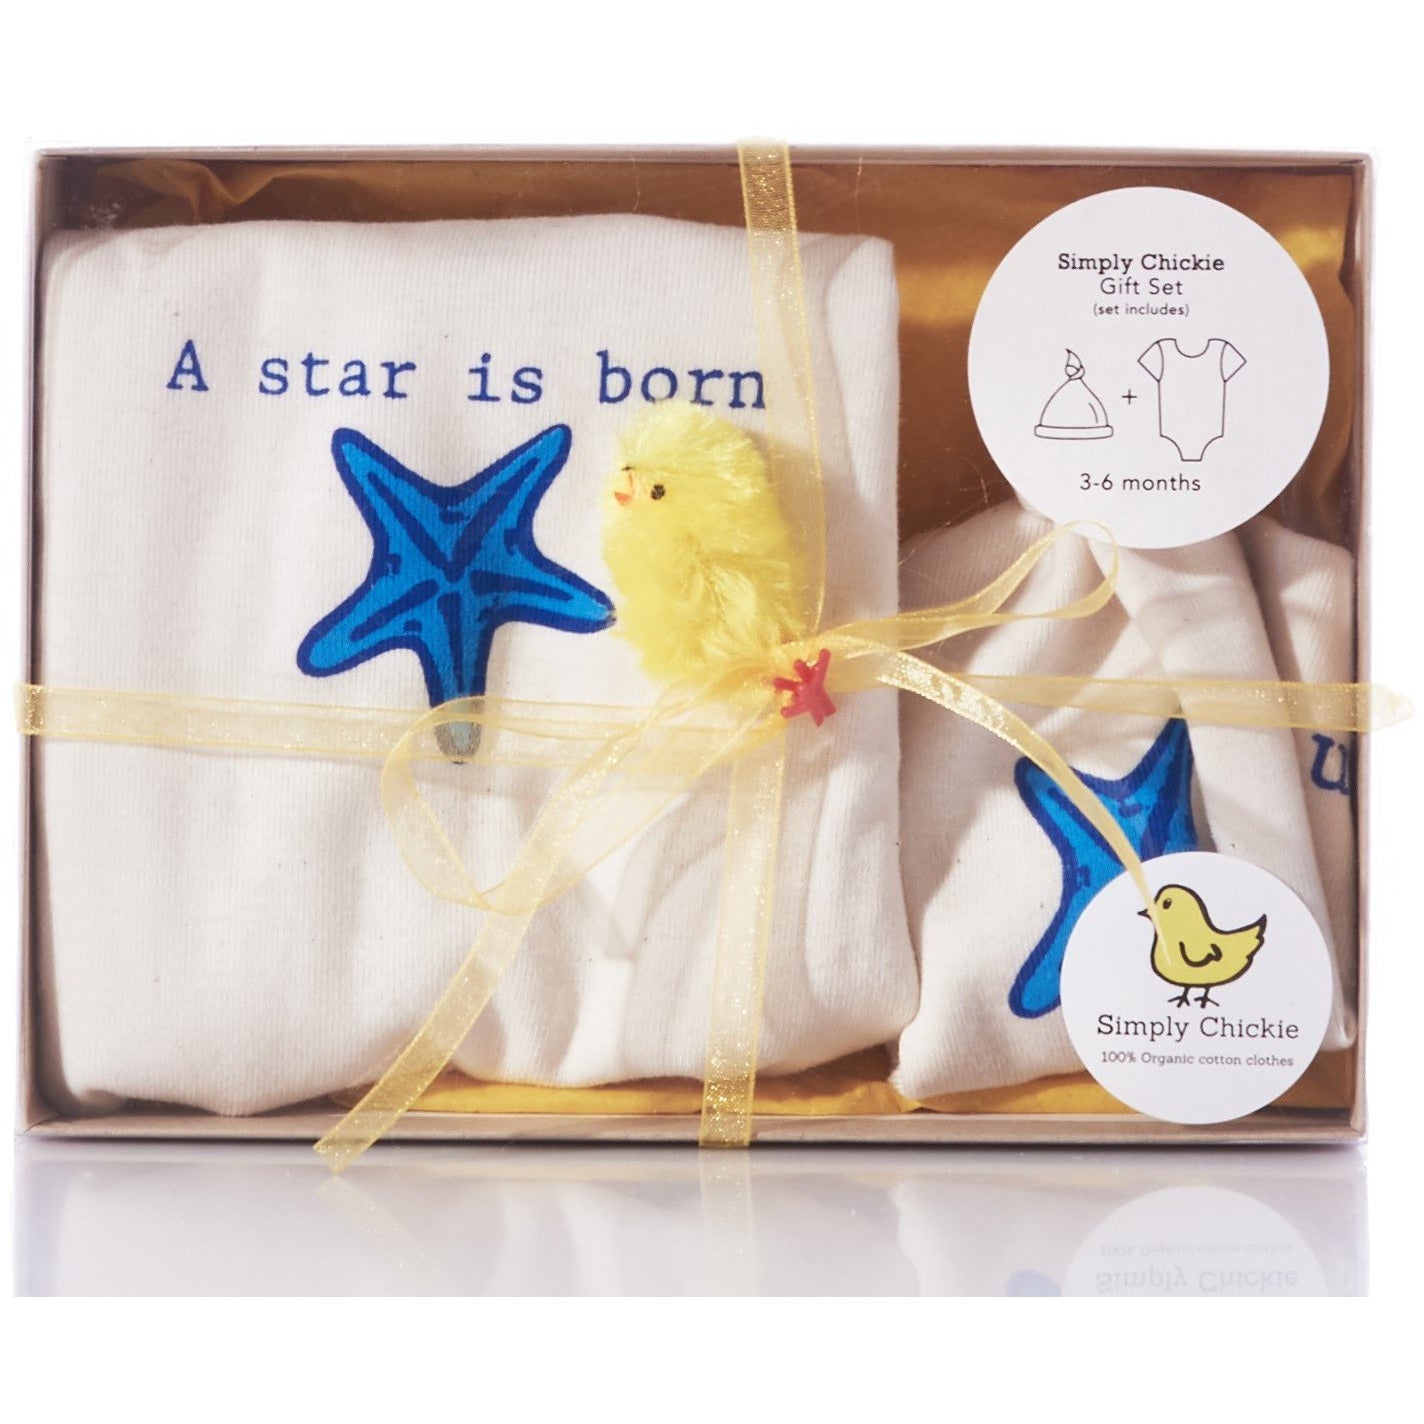 Organic cotton baby gift set - Starfish  LONG SLEEVE AVAILABLE - Simply Chickie